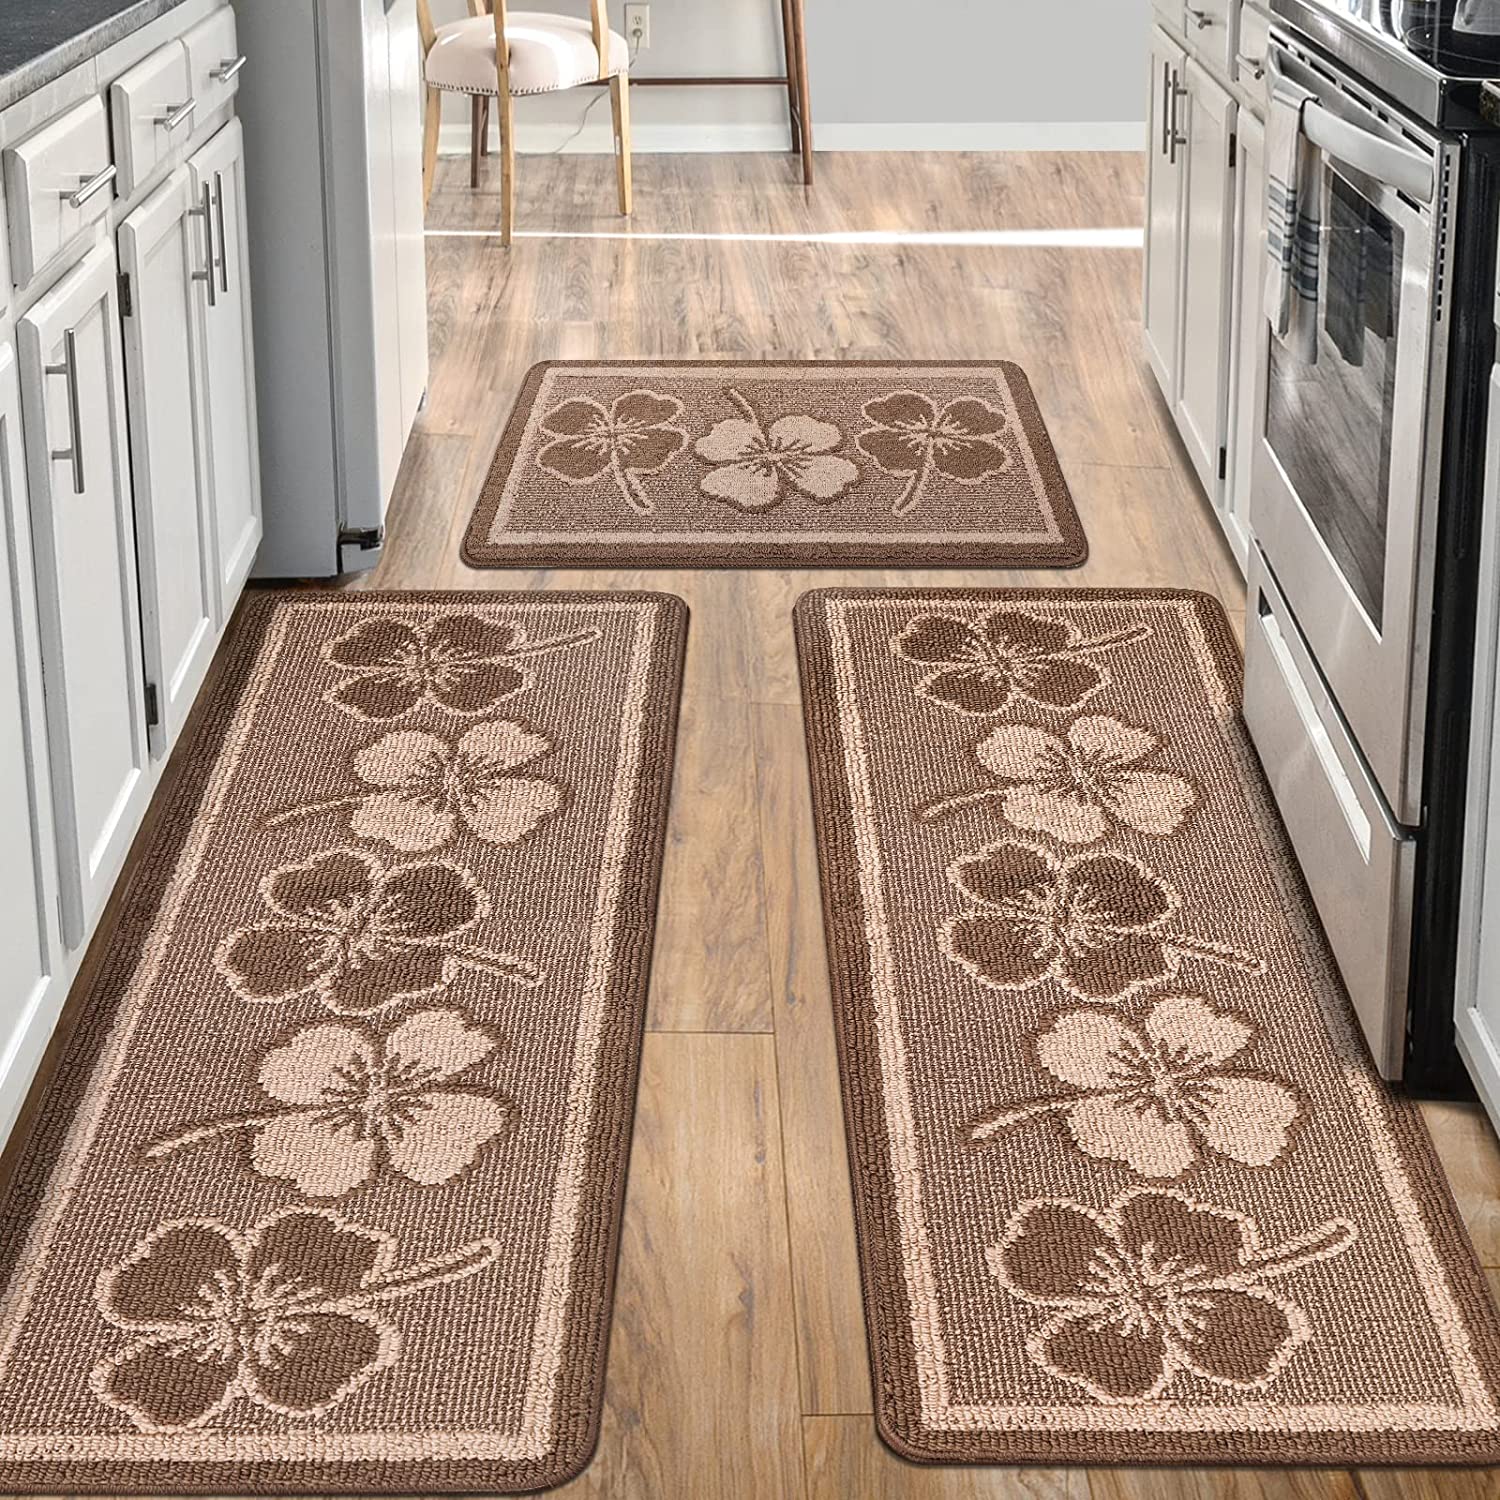 3 Piece Kitchen Rug Set ,non Slip Stain Resistant Rubber Backed